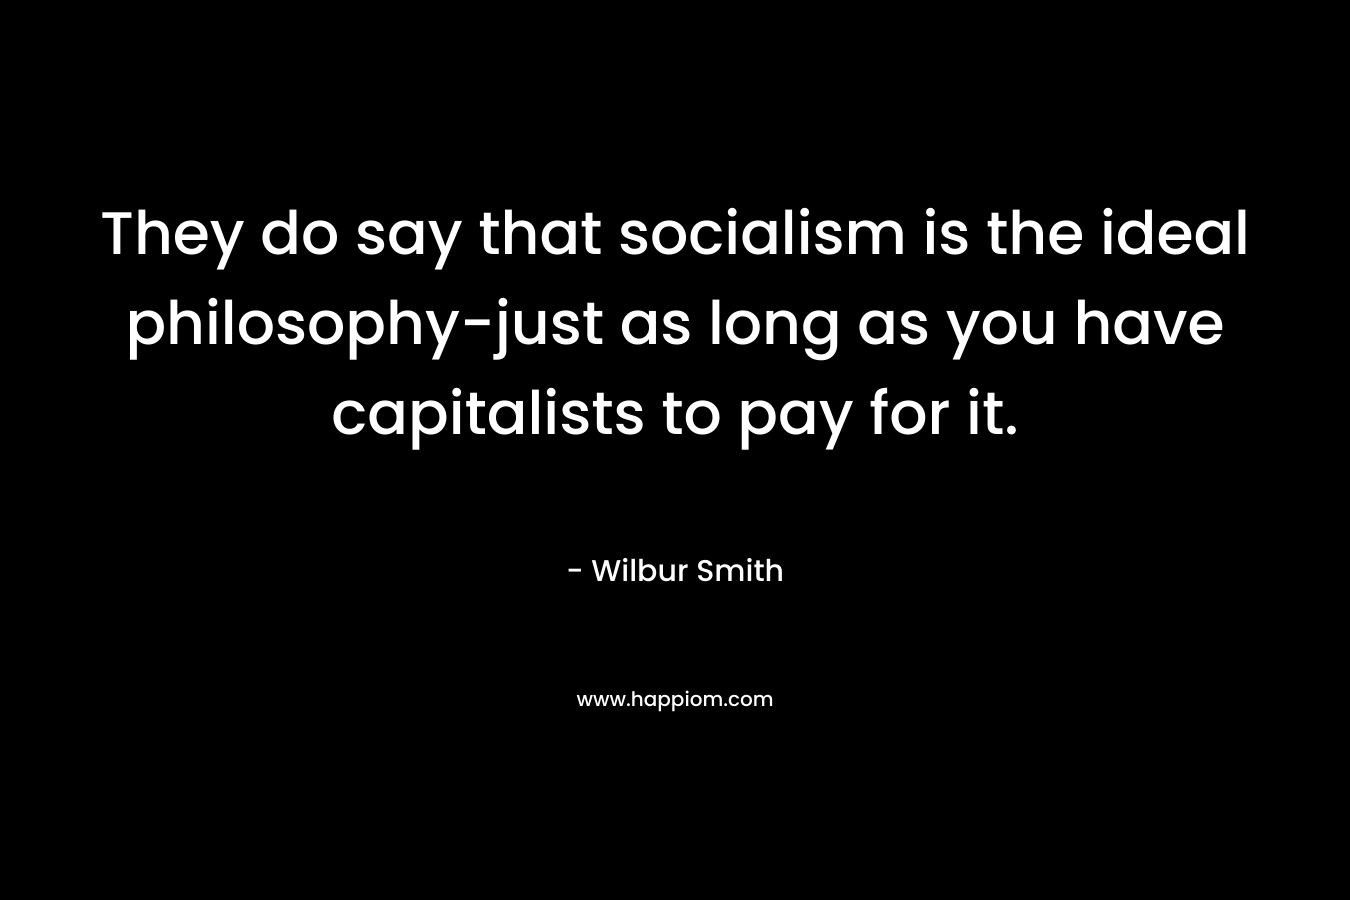 They do say that socialism is the ideal philosophy-just as long as you have capitalists to pay for it. – Wilbur Smith